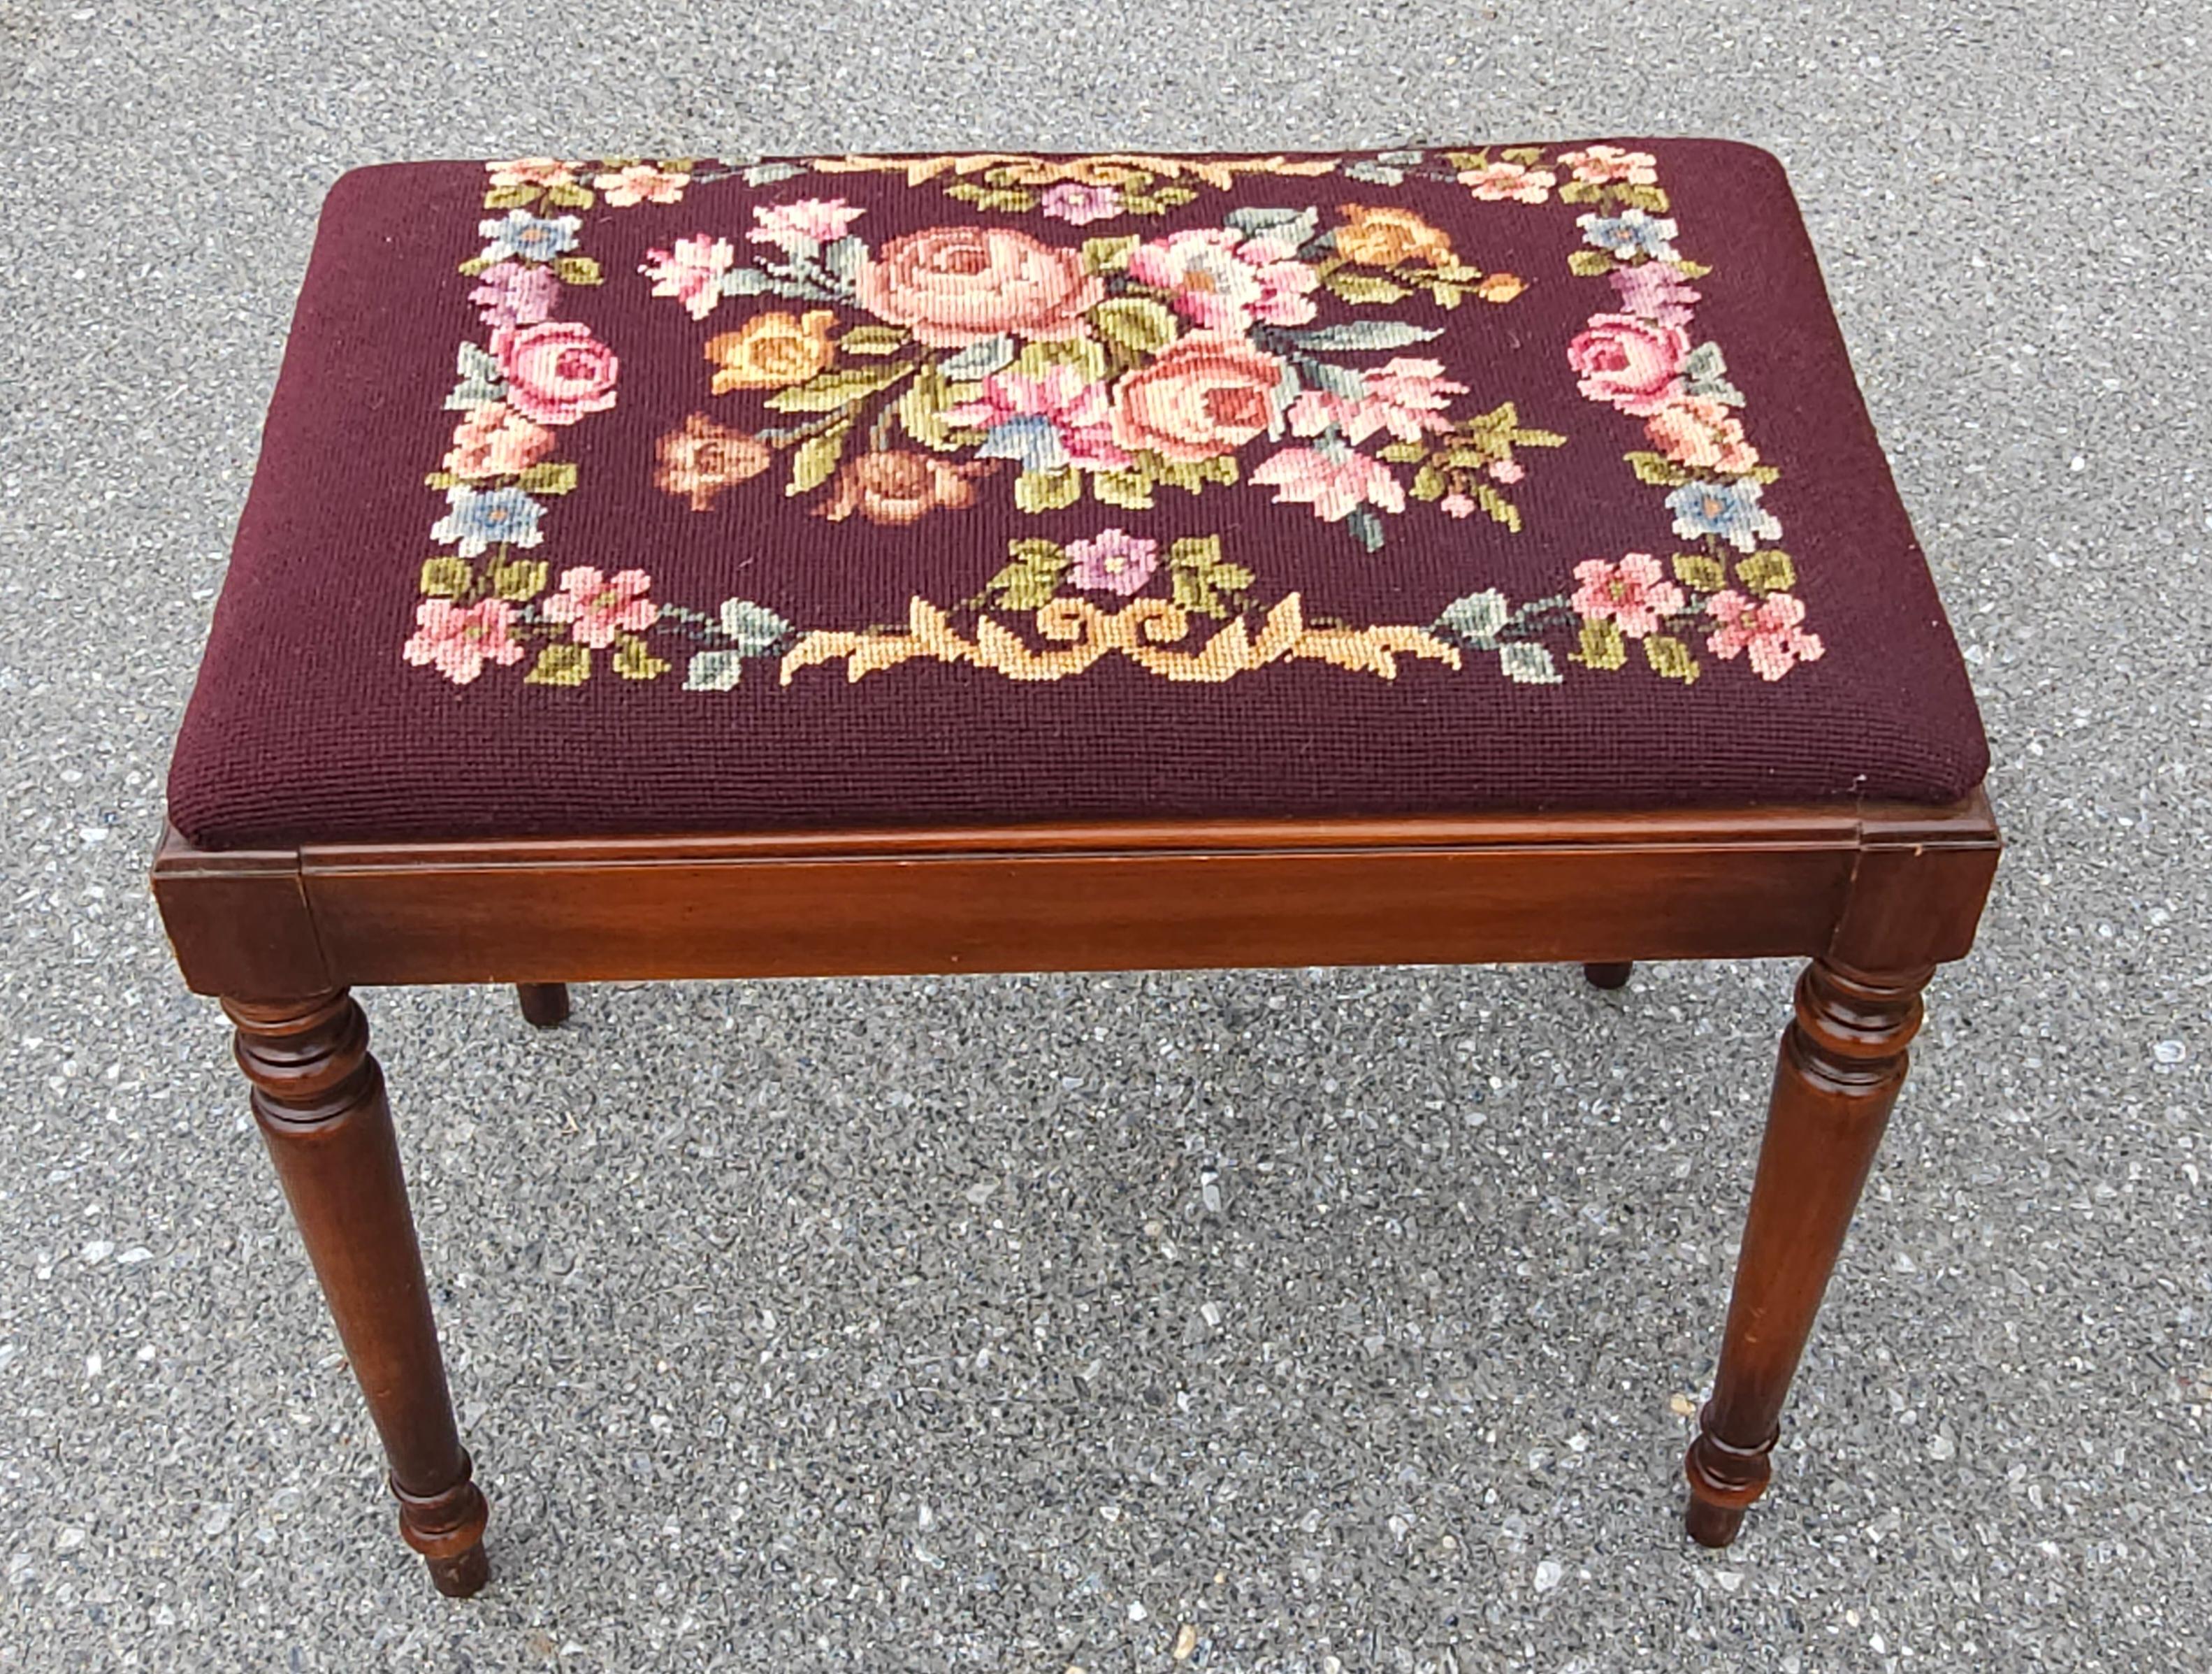 A Mid 20th Century Kindel Furniture solid Oxford Cherry and  Needlepoint Upholstered Bench with flower gallore.
Measures 24